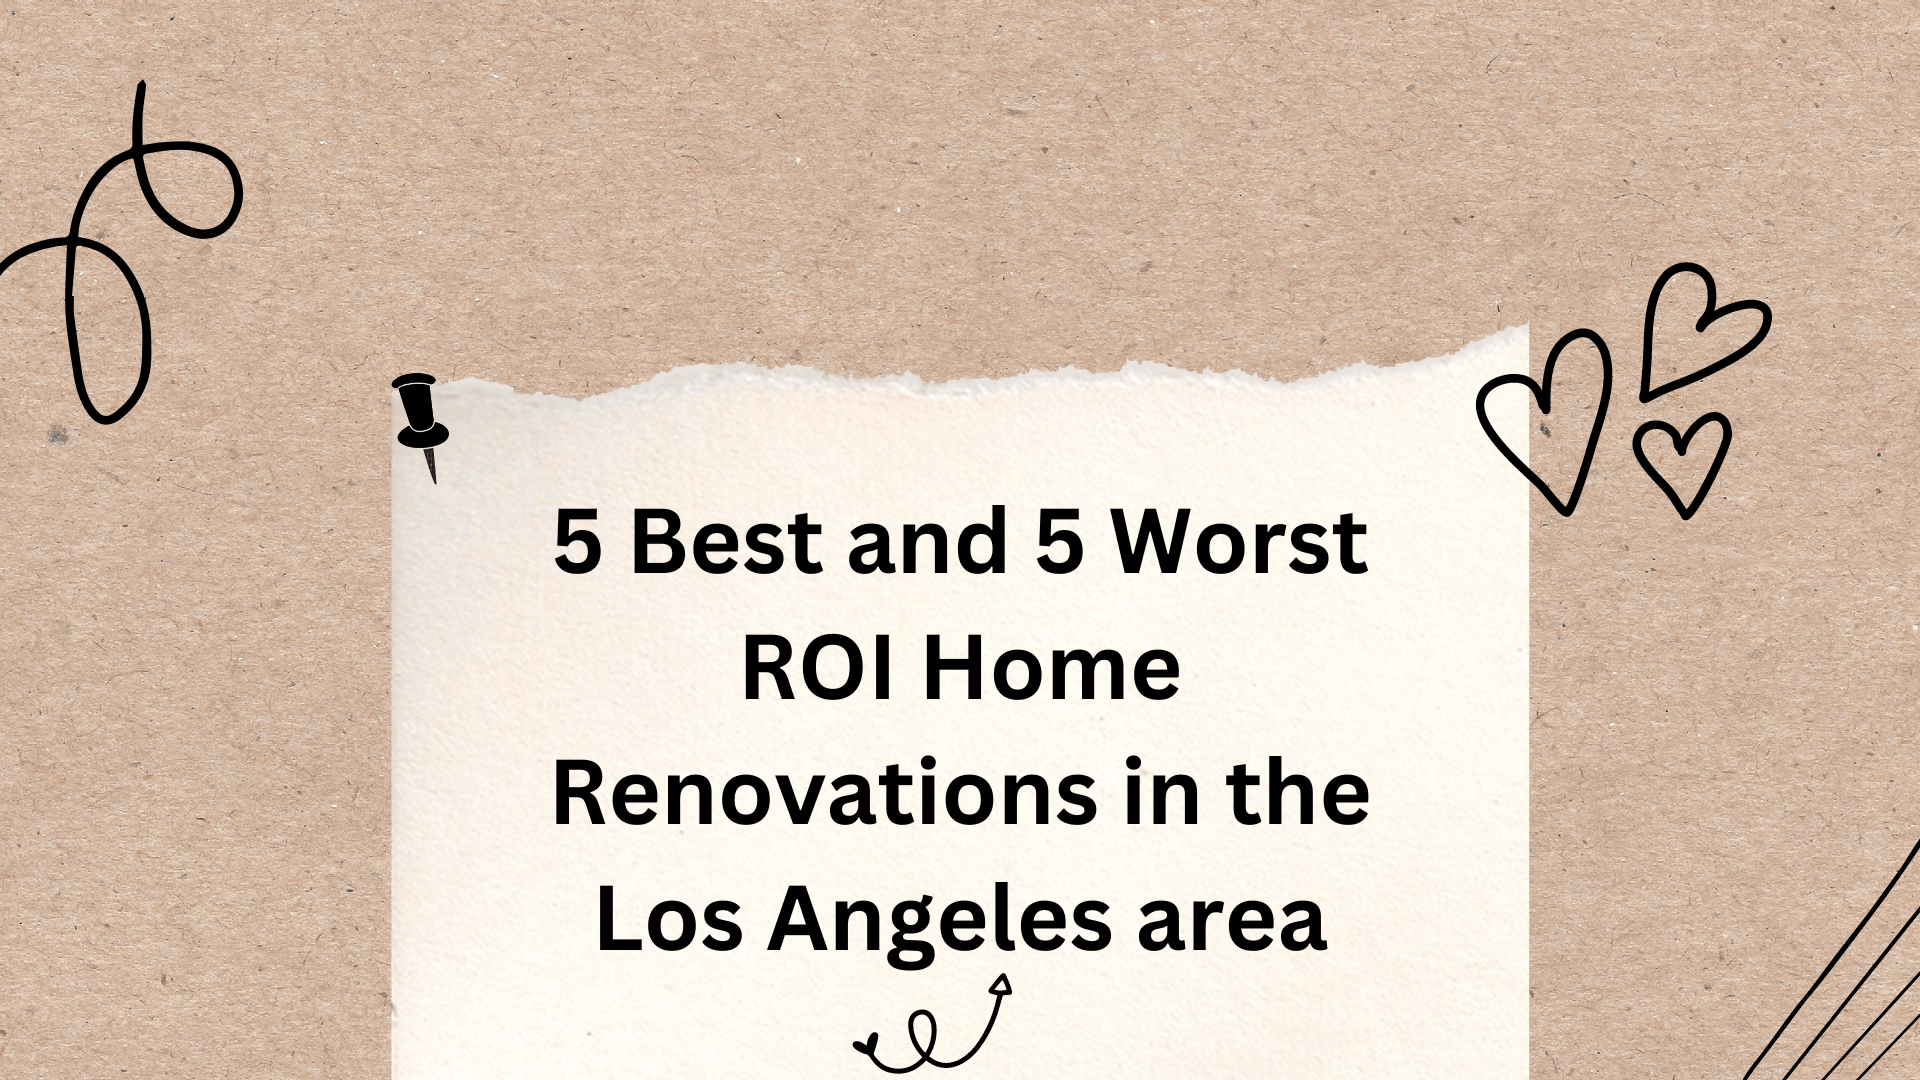 2023 Cost vs. Value Report: 5 Best and 5 Worst ROI Home Renovations in the Los Angeles area